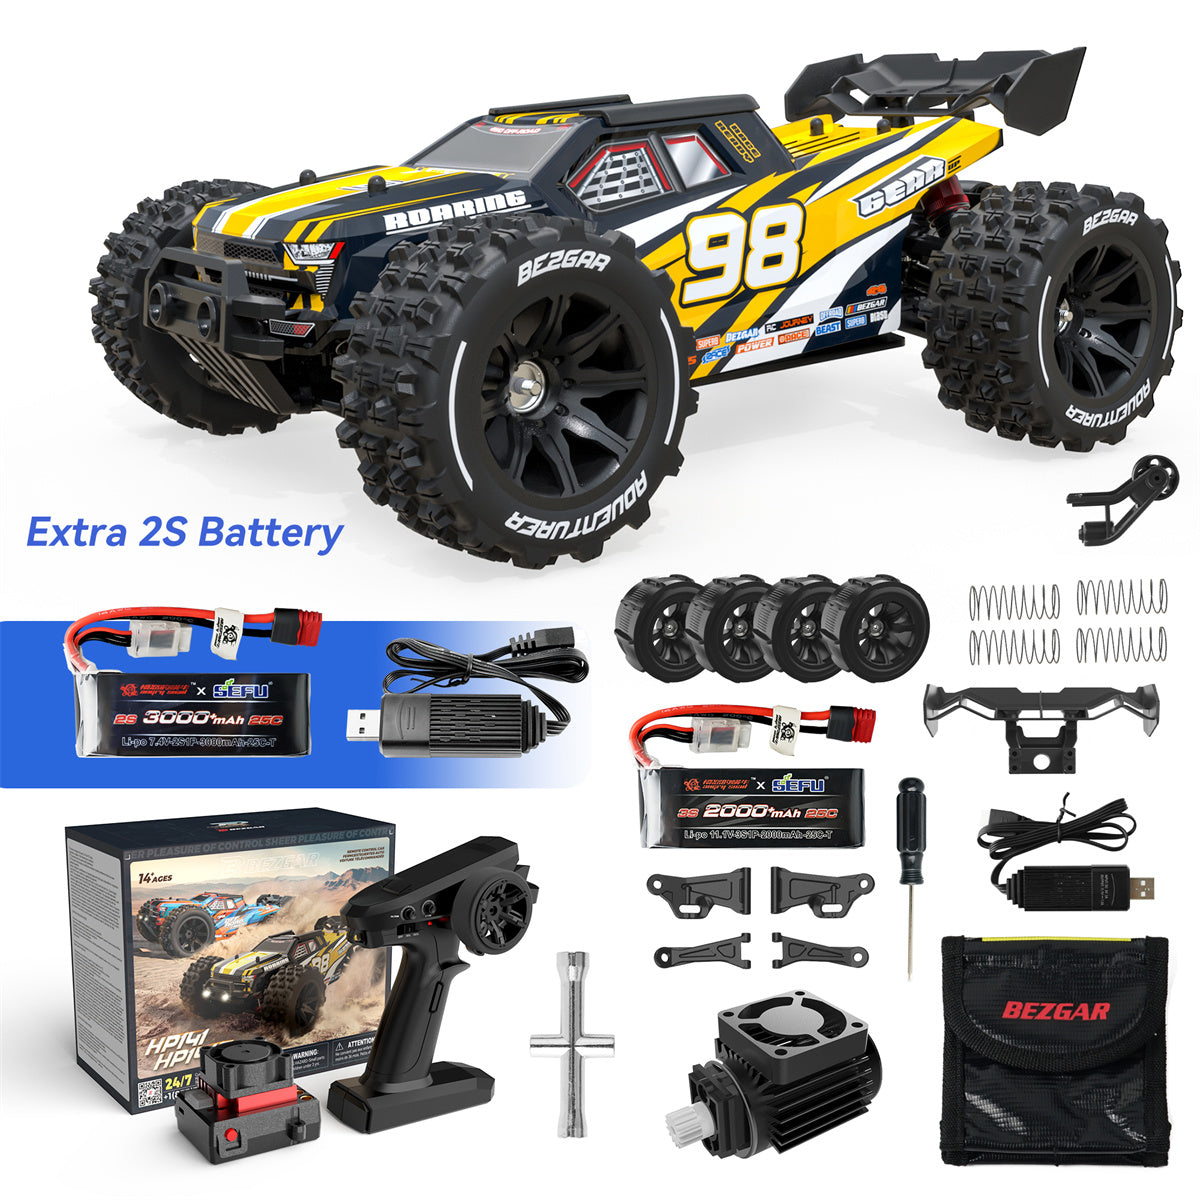 HP141S RC car with extra 2s battery